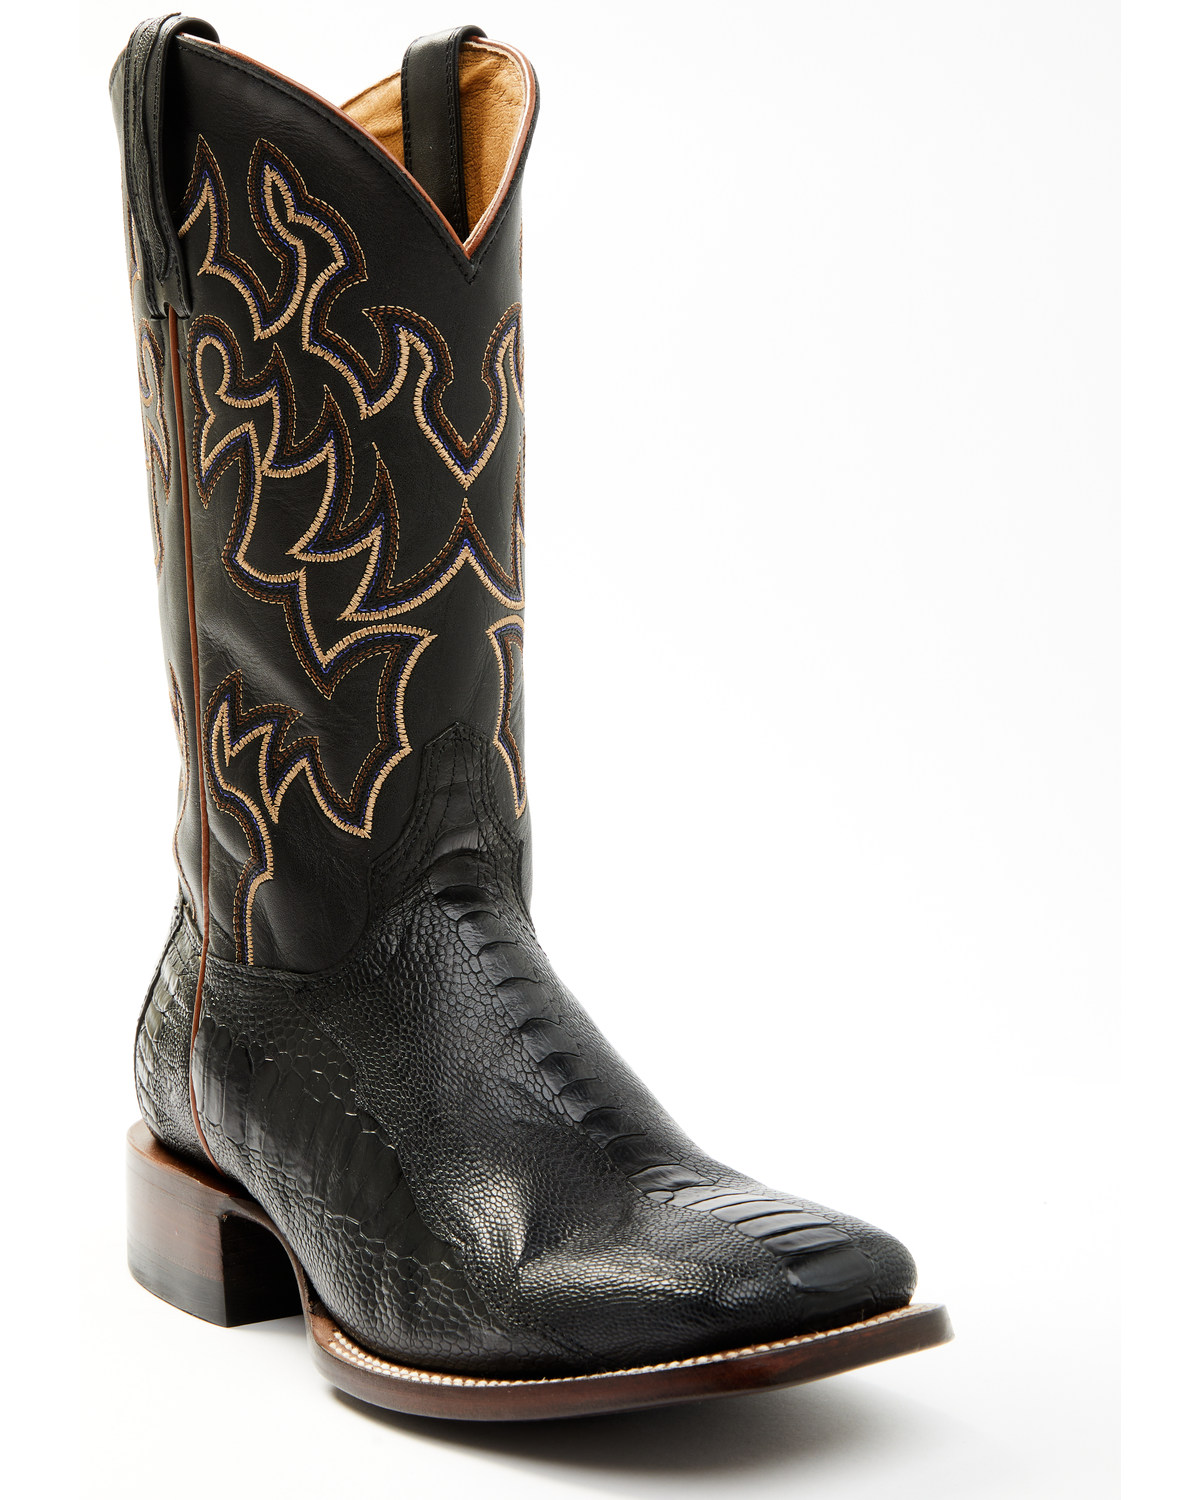 Cody James Men's Exotic Ostrich Leg Western Boots - Broad Square Toe